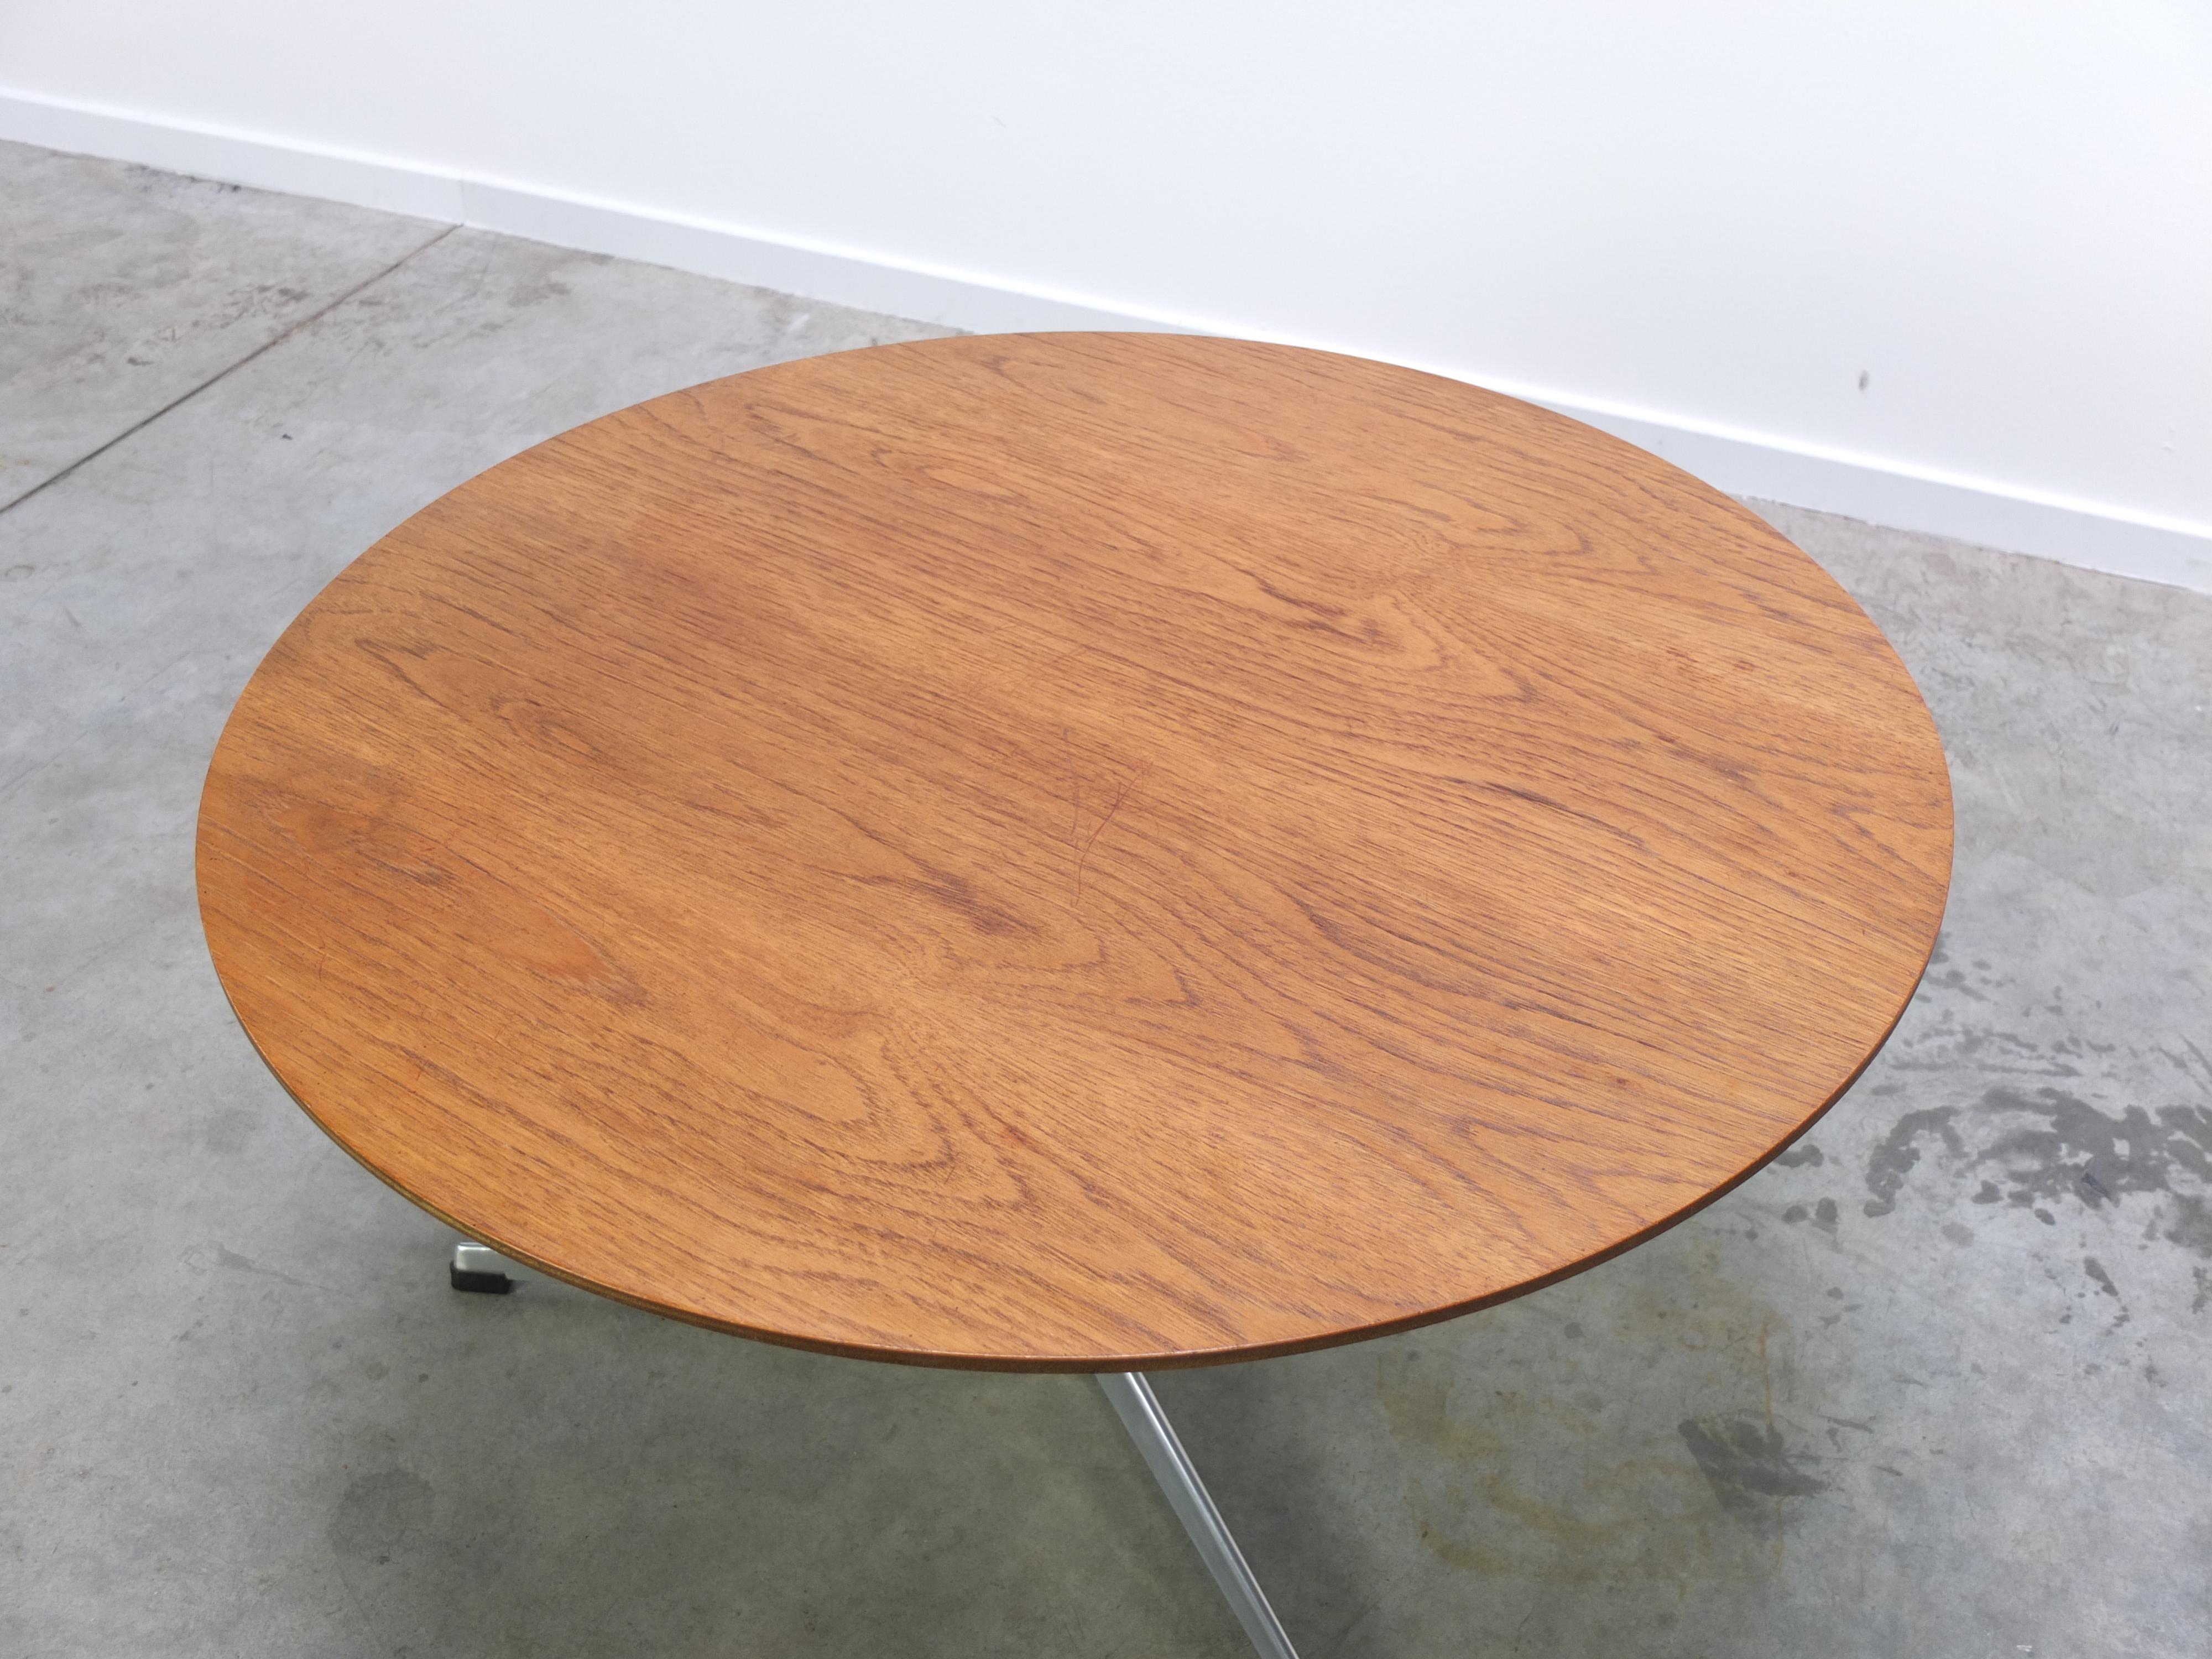 Early Teak Coffee Table by Arne Jacobsen for Fritz Hansen, 1960s For Sale 2